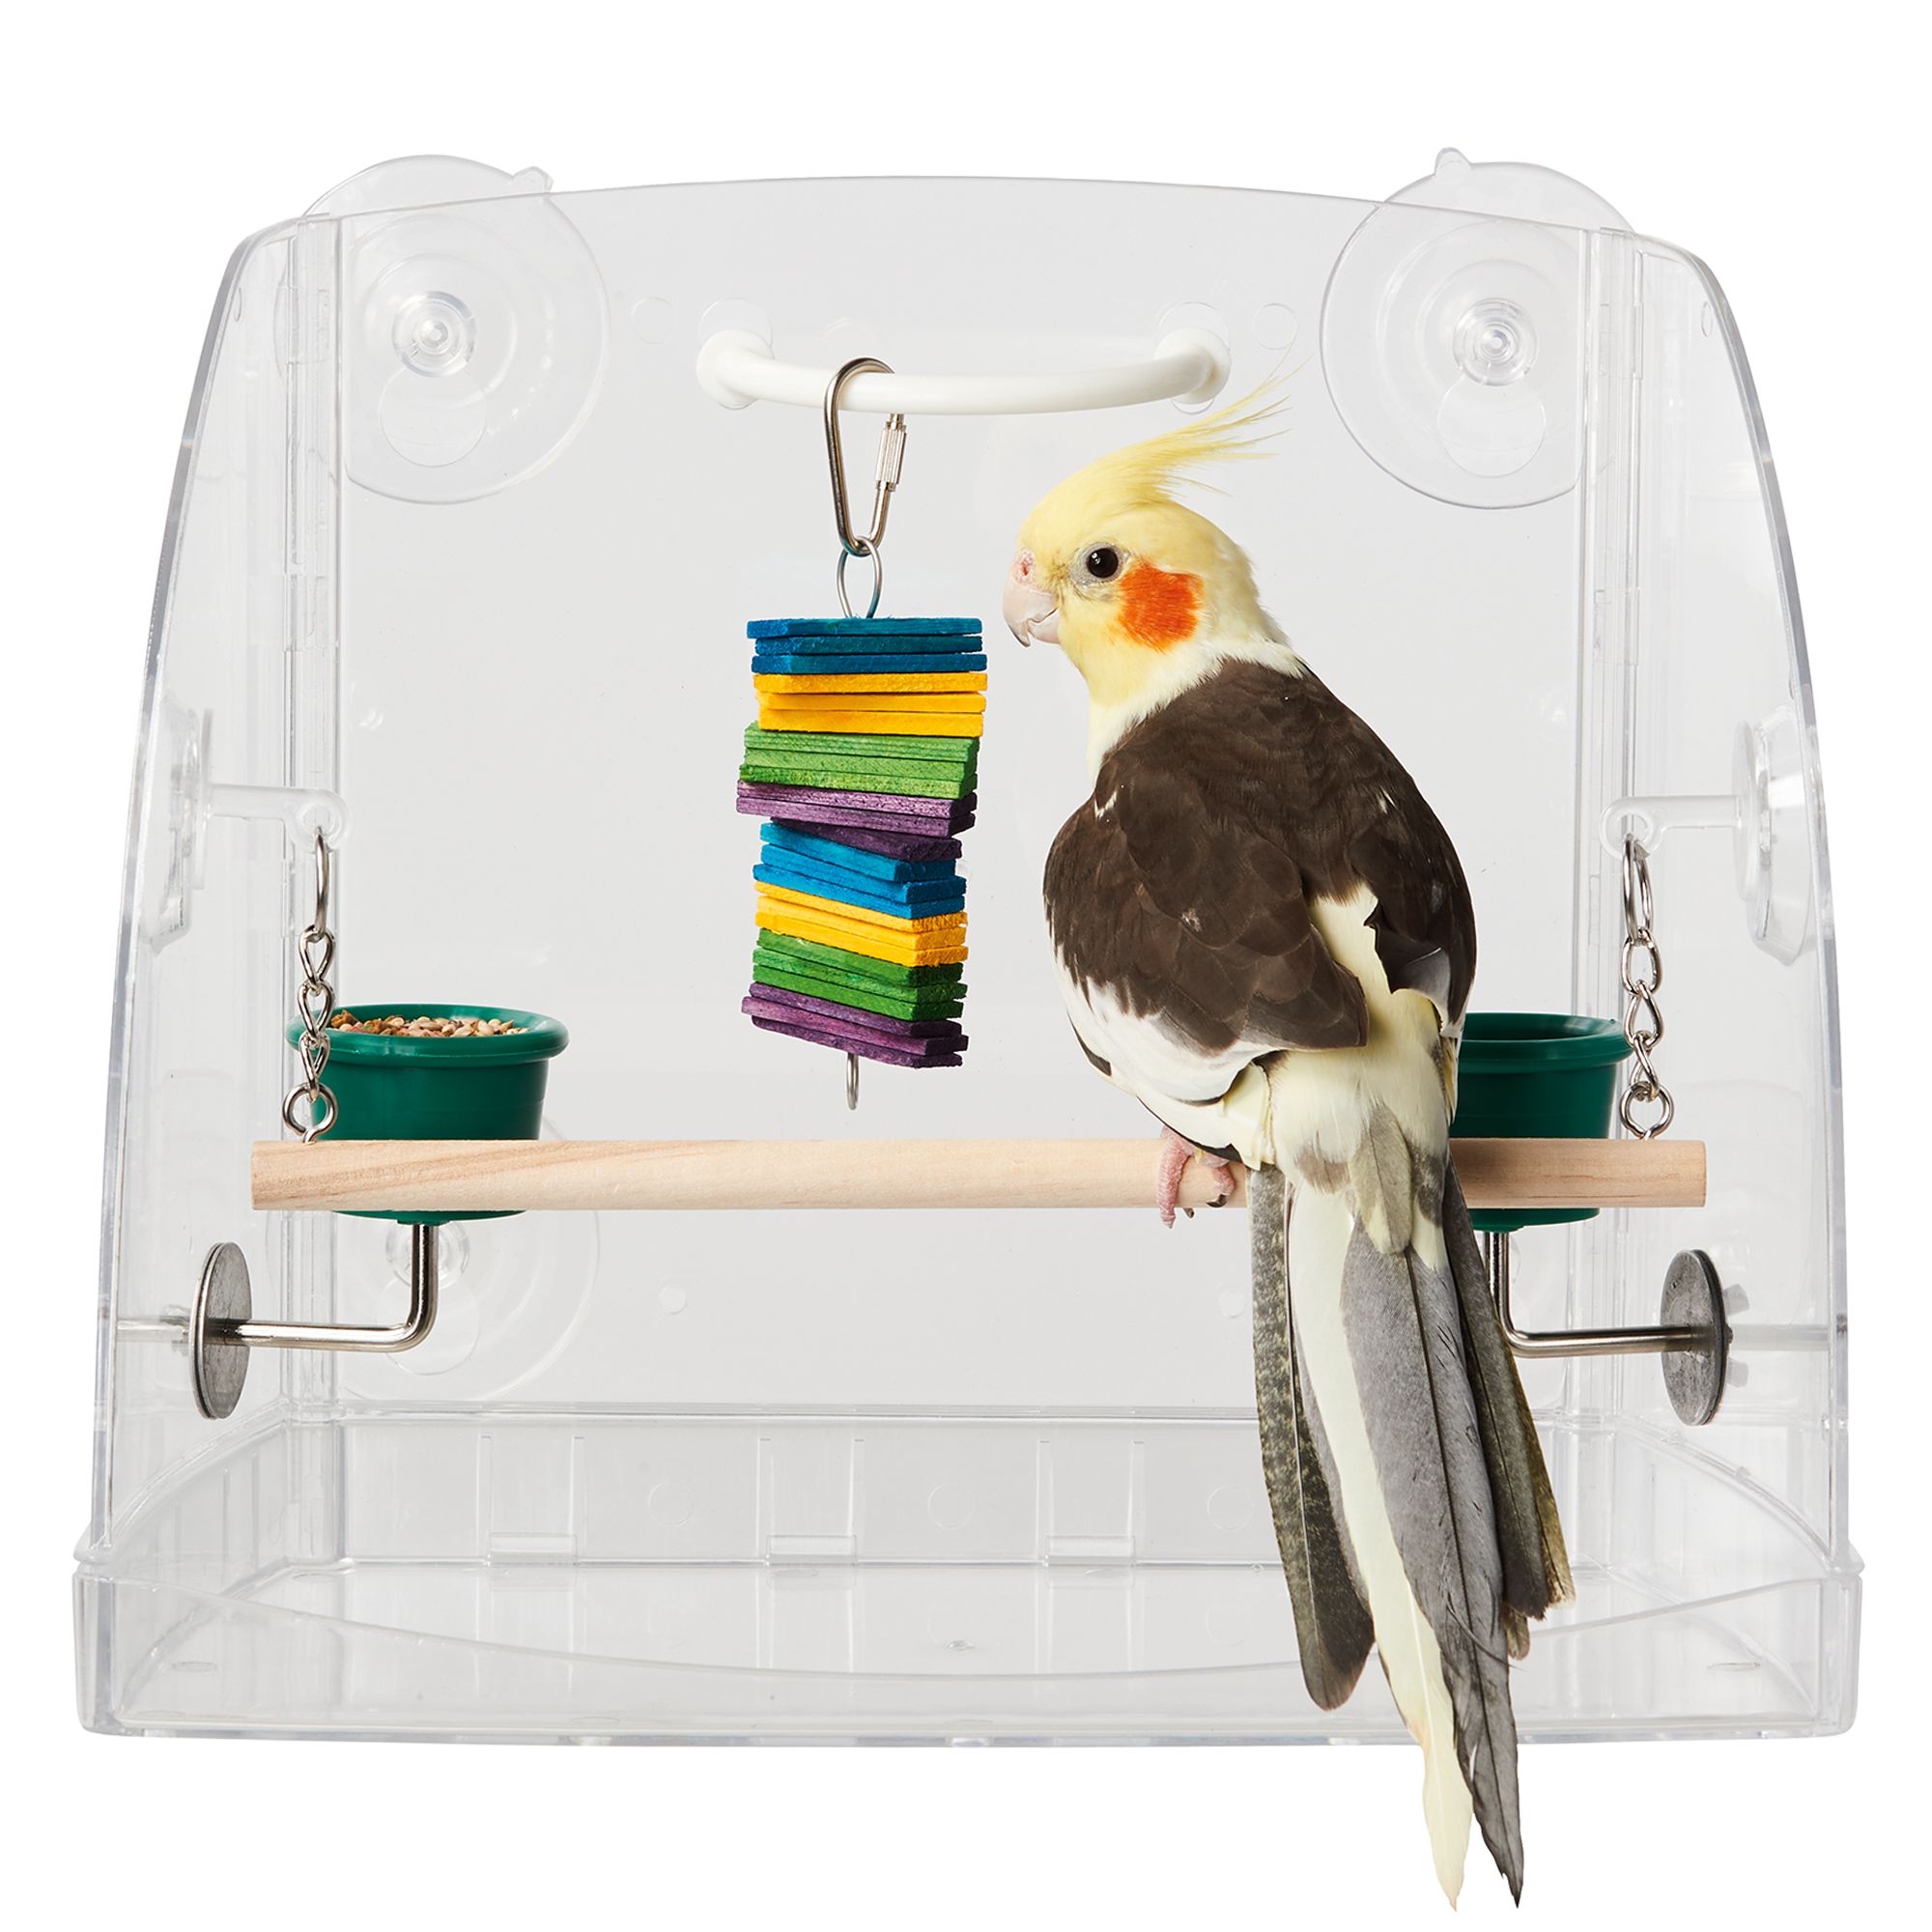 Can You Buy Birds At Petsmart Canary For Sale Live Pet Birds Petsmart